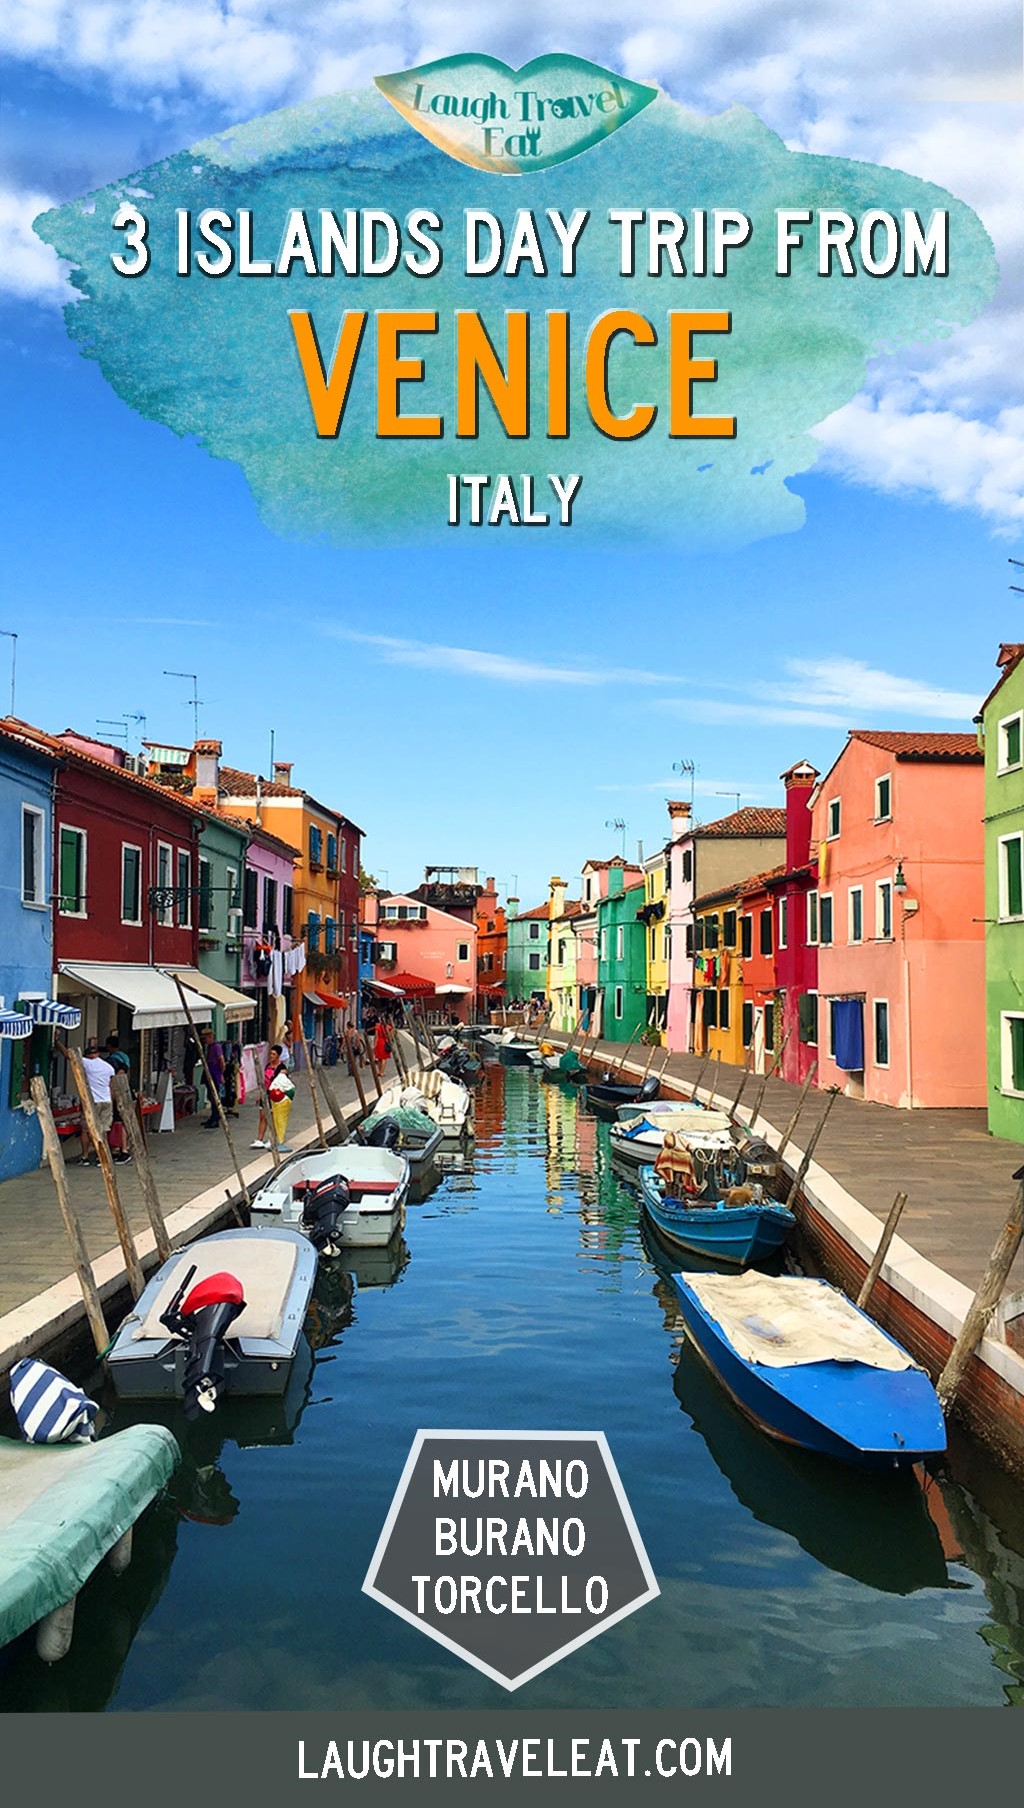 A trip to Venice isn't complete until you visit the islands. Short on time, here's our review of viator tour to Murano, Burano & Torcello so we could see it all in one day! #Murano #Burano #Torcello #Venice #Italy